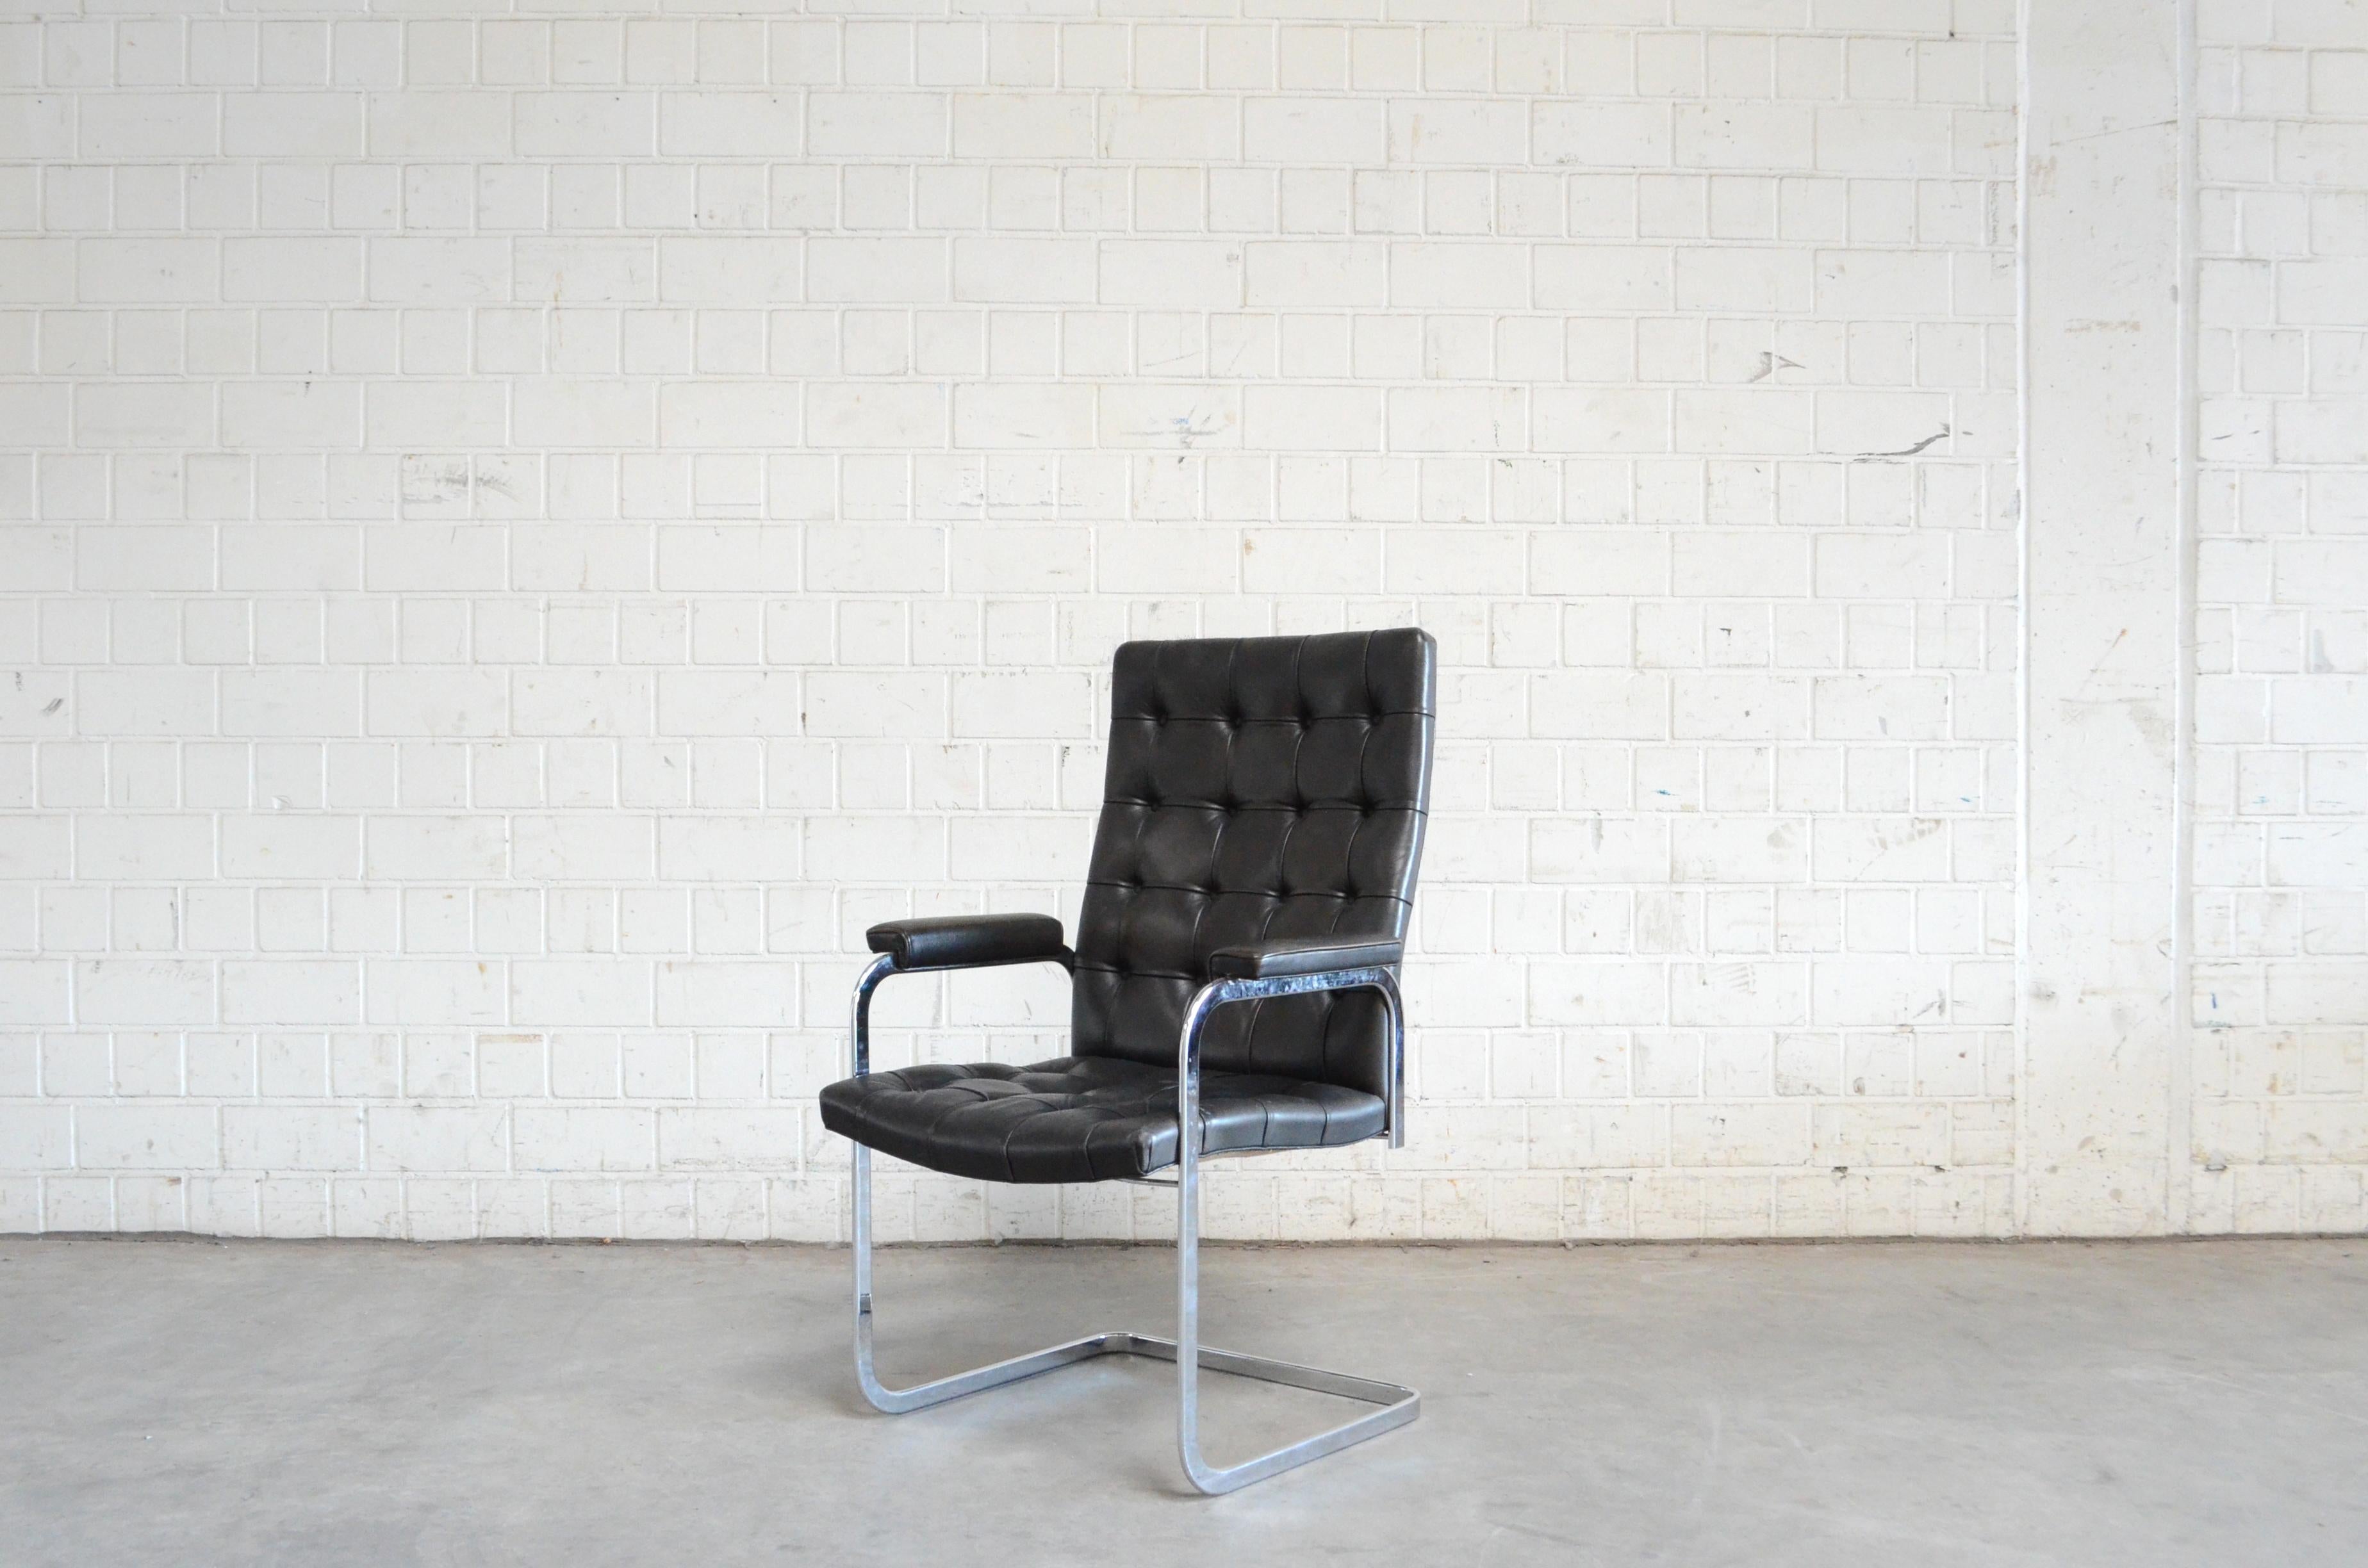 Robert Haussmann RH 305 armchair design of 1957 and manufactured by De Sede.
Black aniline leather an a chrome steel frame.
This is a Classic Swiss design chair in the tufted high back version.
Great condition.
Price for 1 Chair.
 